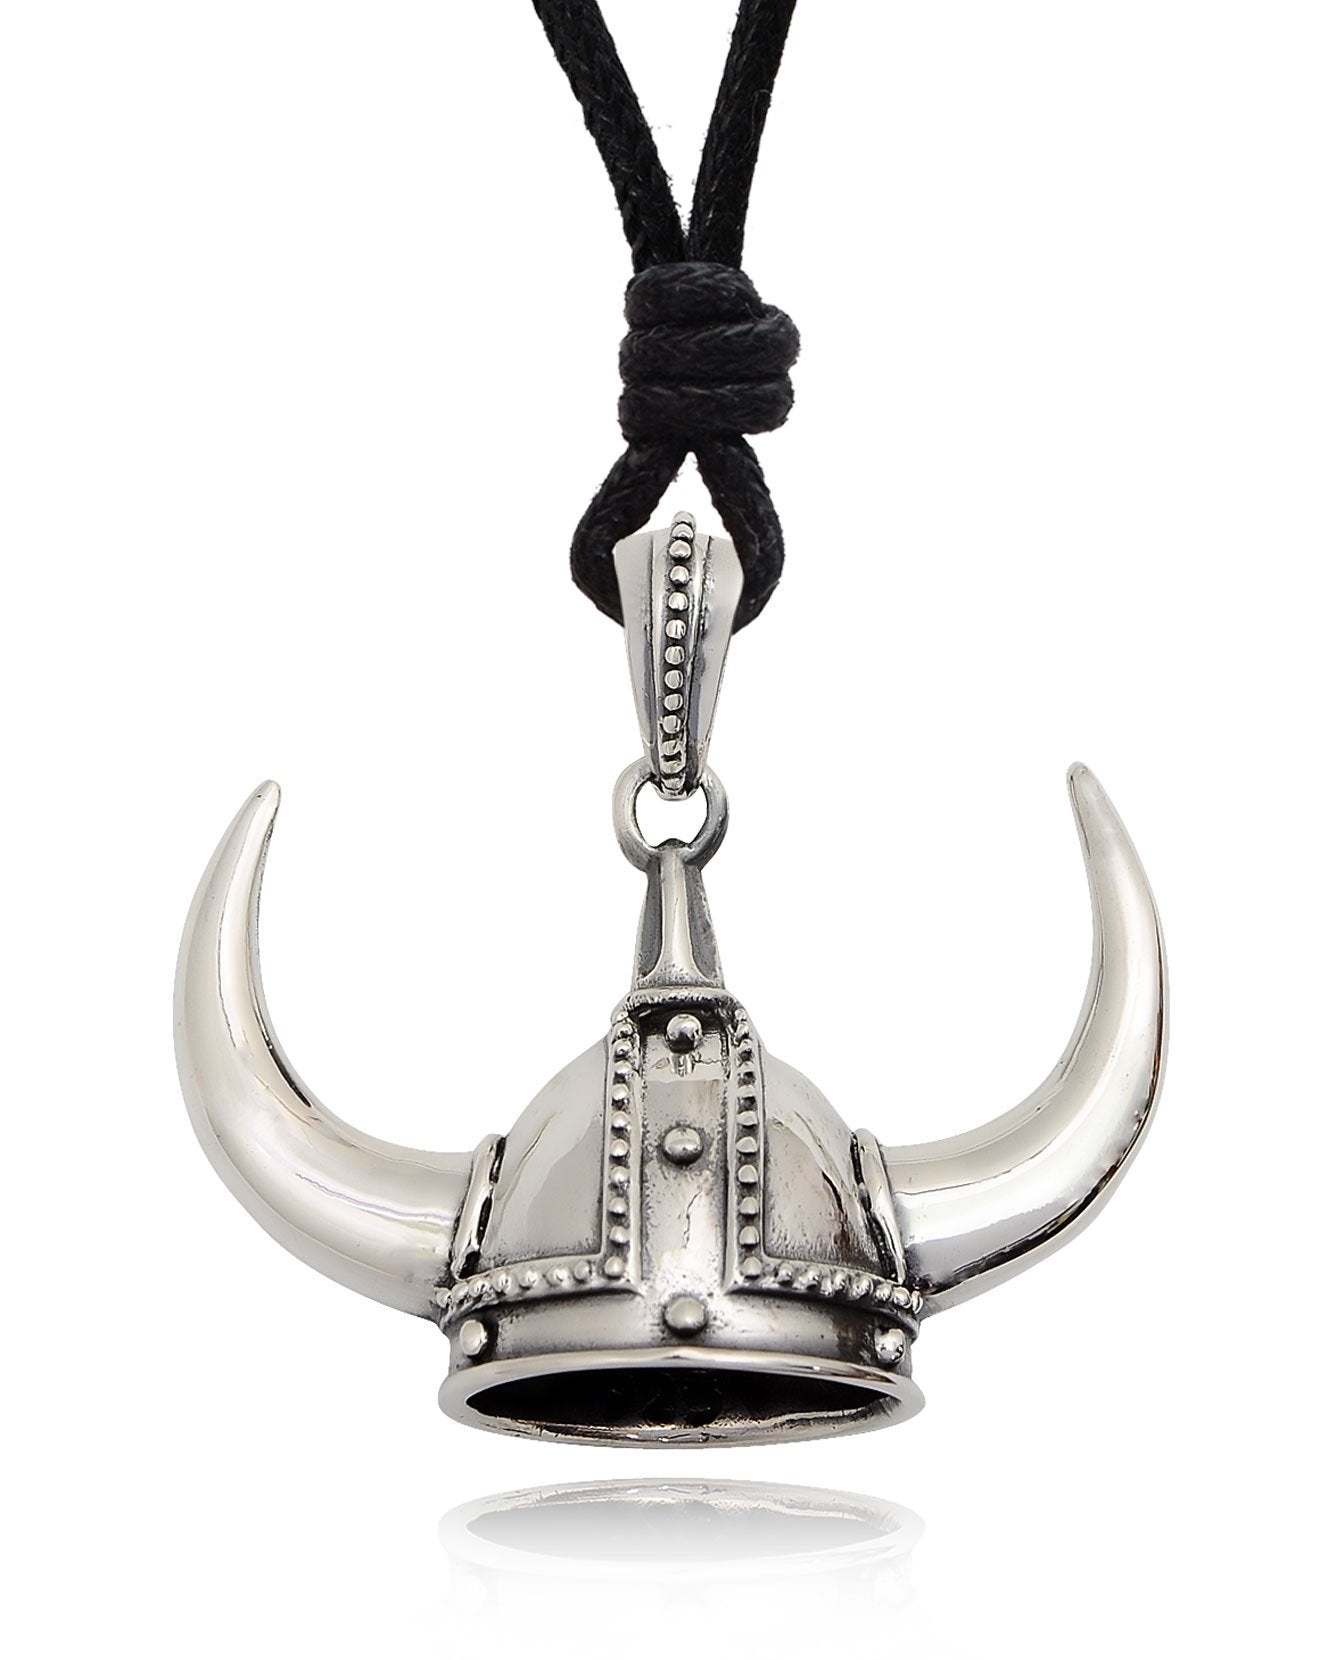 Viking Helmet Norway Sterling Silver Pewter Brass Charm Necklace Pendant Jewelry